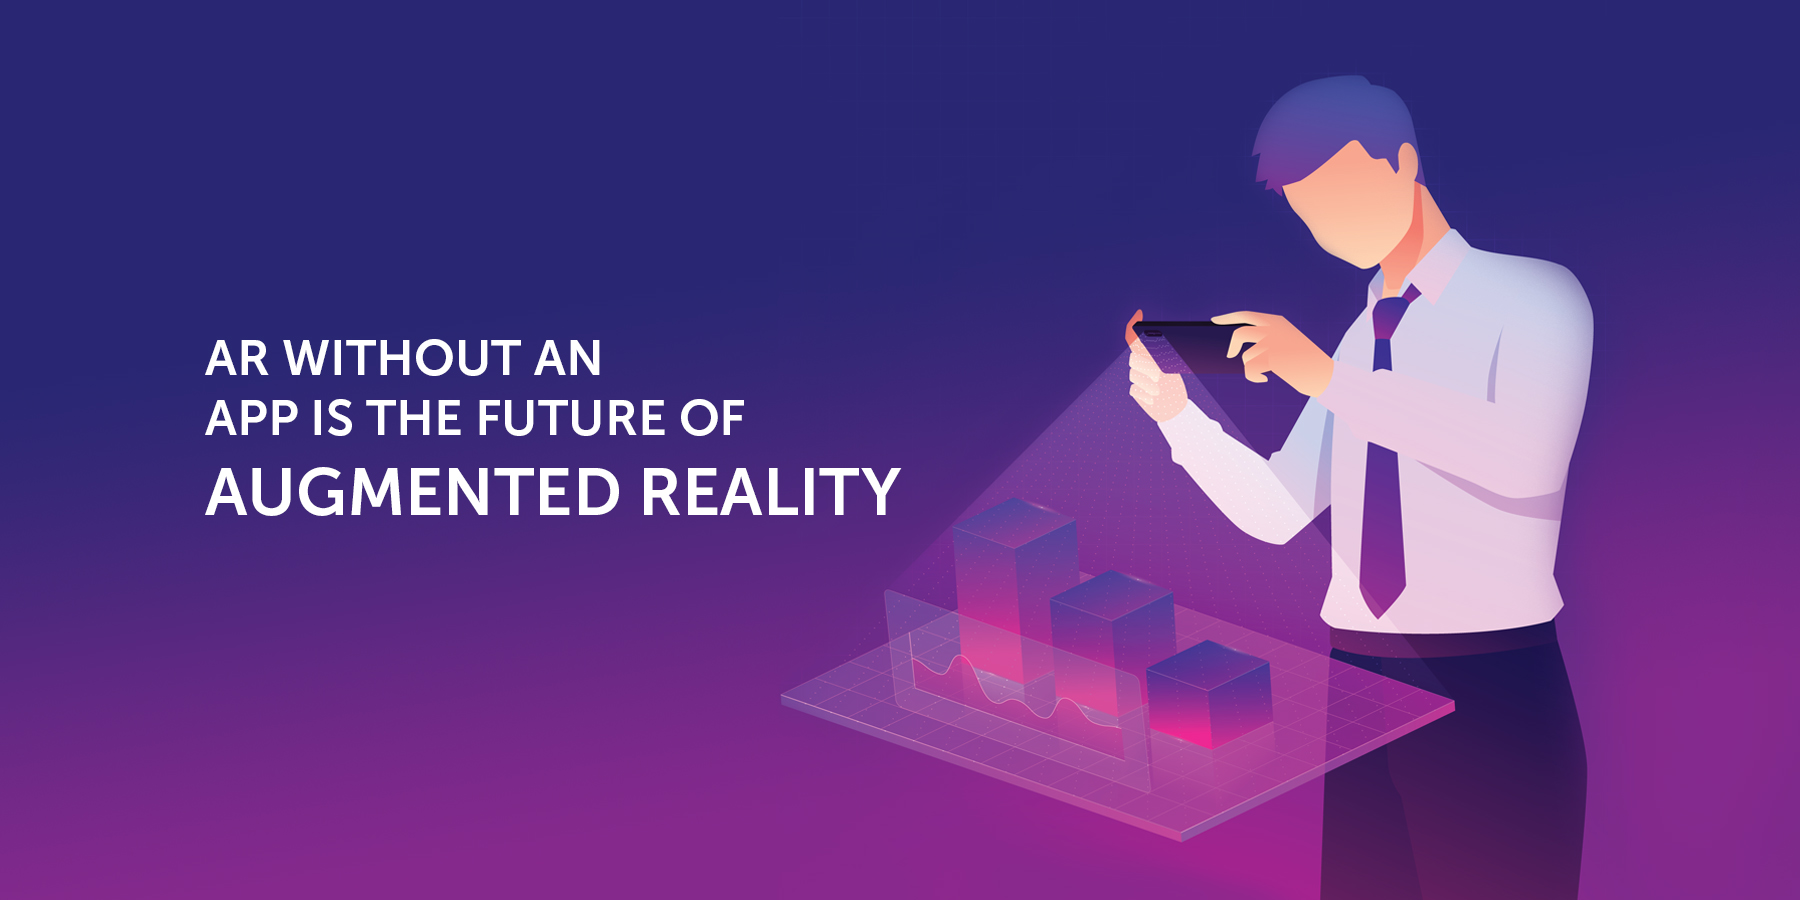 AR Without an APP is the Future of Augmented Reality